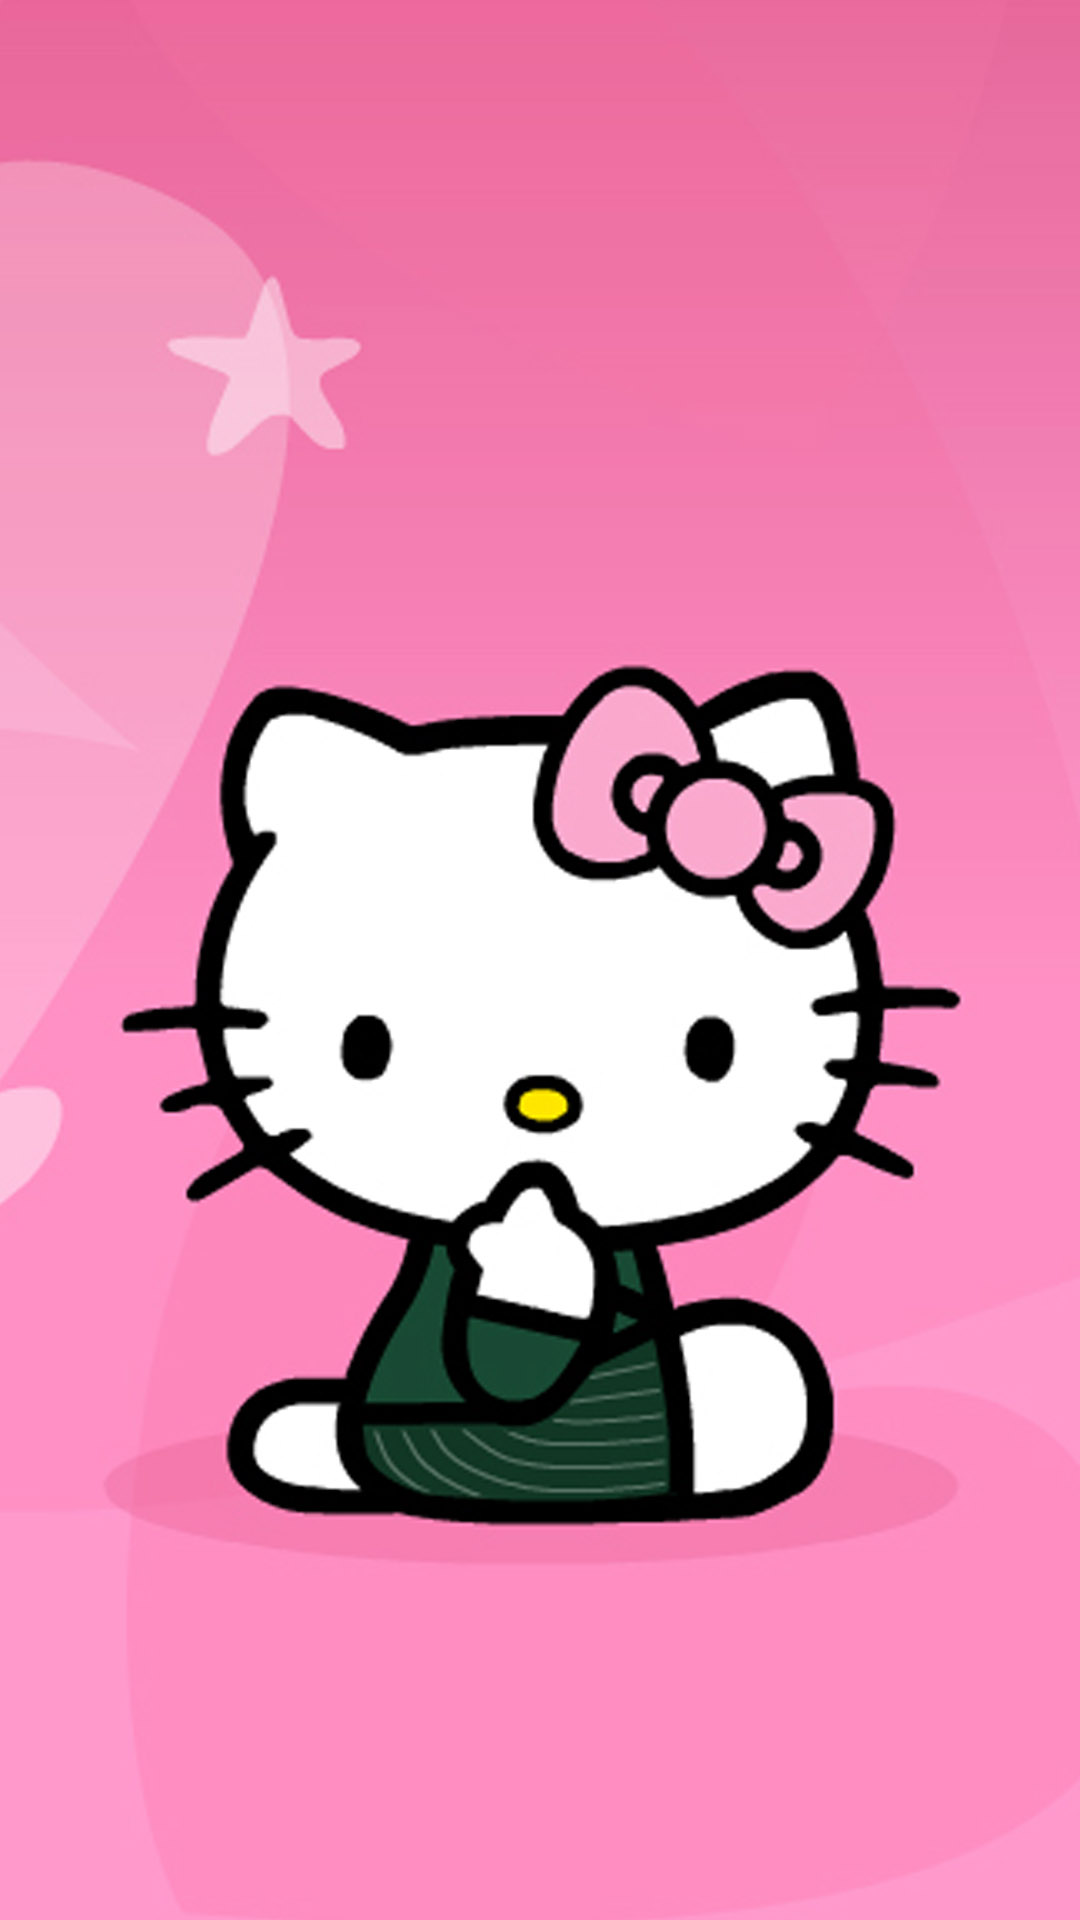 Free Download Iphone 6 Plus Hd Wallpaper For Hello Kitty Lovers Hd Wallpapers For 1080x19 For Your Desktop Mobile Tablet Explore 49 49ers Iphone 6 Plus Wallpaper Iphone 6